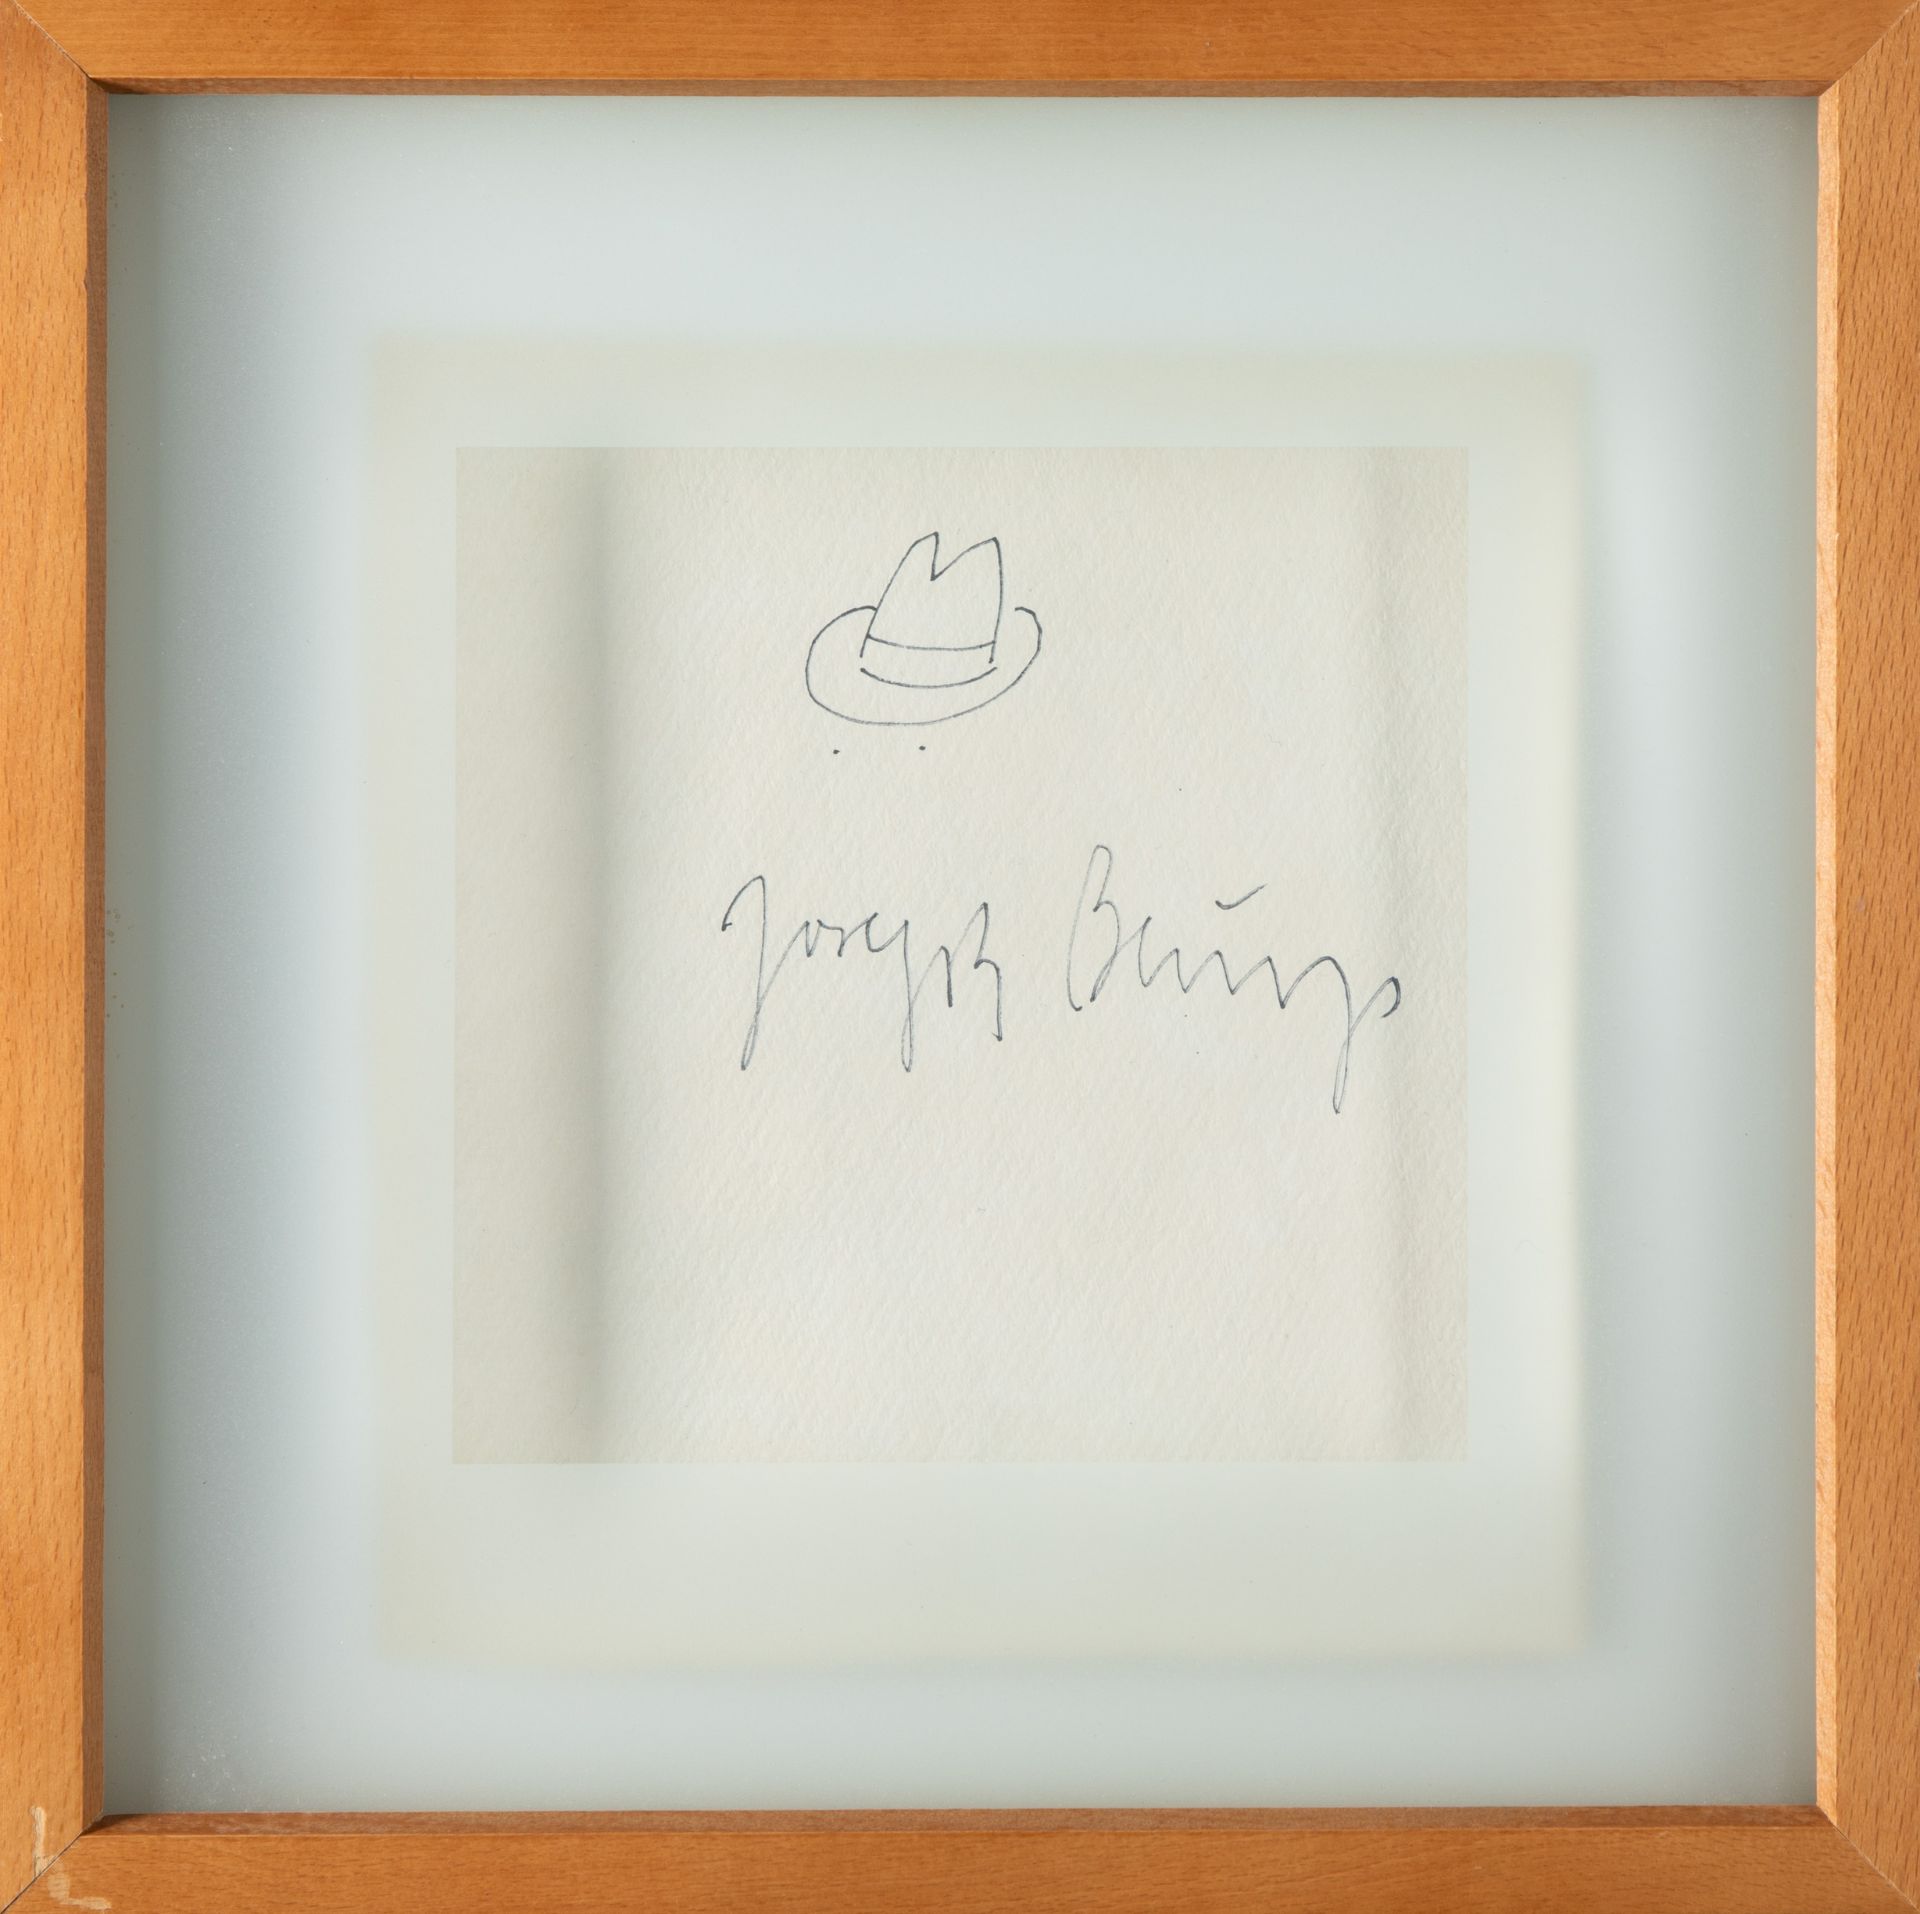 Joseph Beuys*, Drawing, hat with signature, 1979